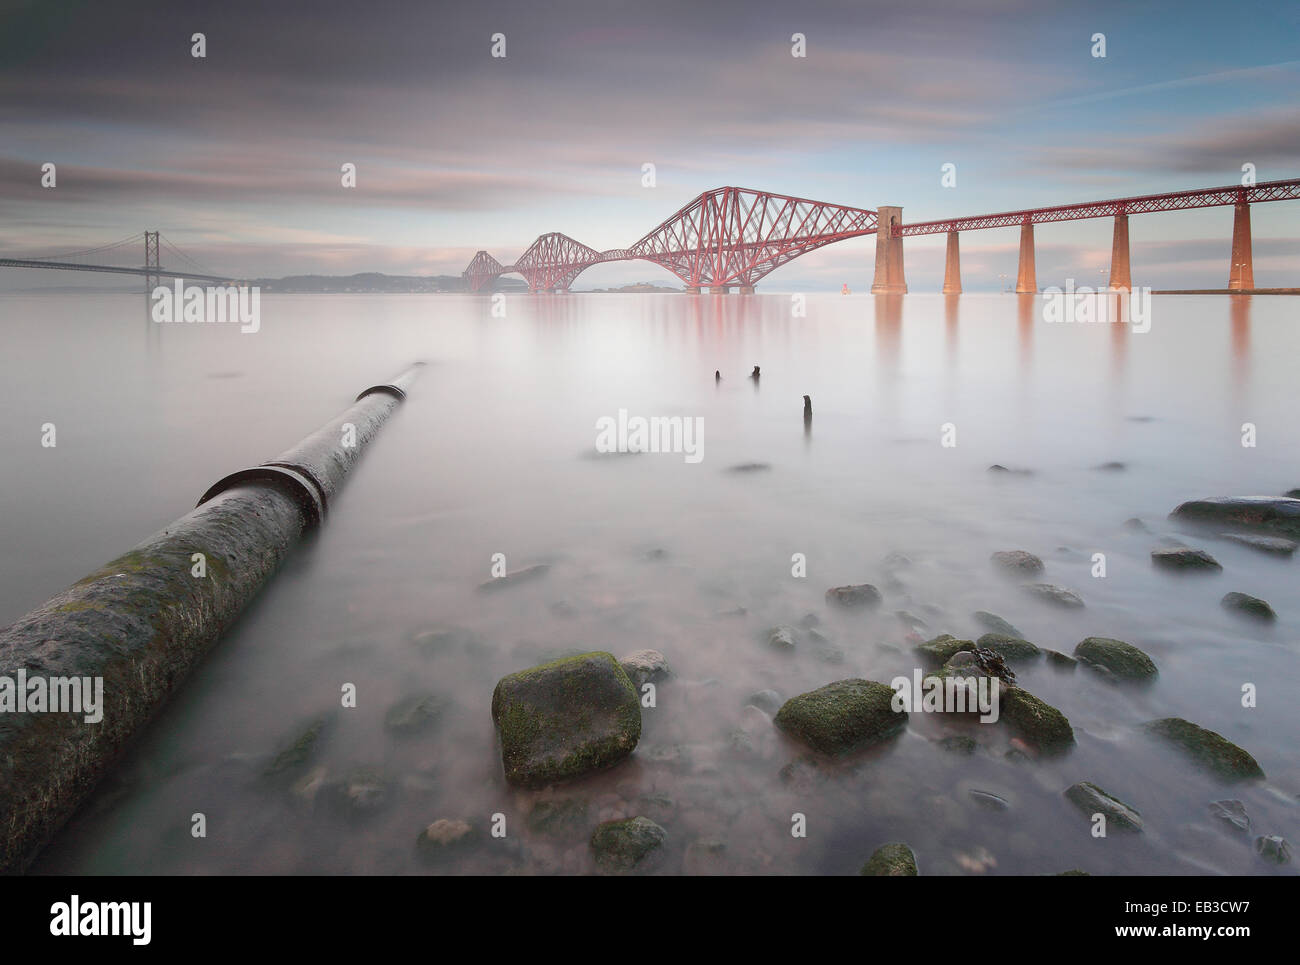 UK, Scotland, Queensferry, Forth Rail Bridge seen from across calm sea with pipe running underwater in foreground Stock Photo